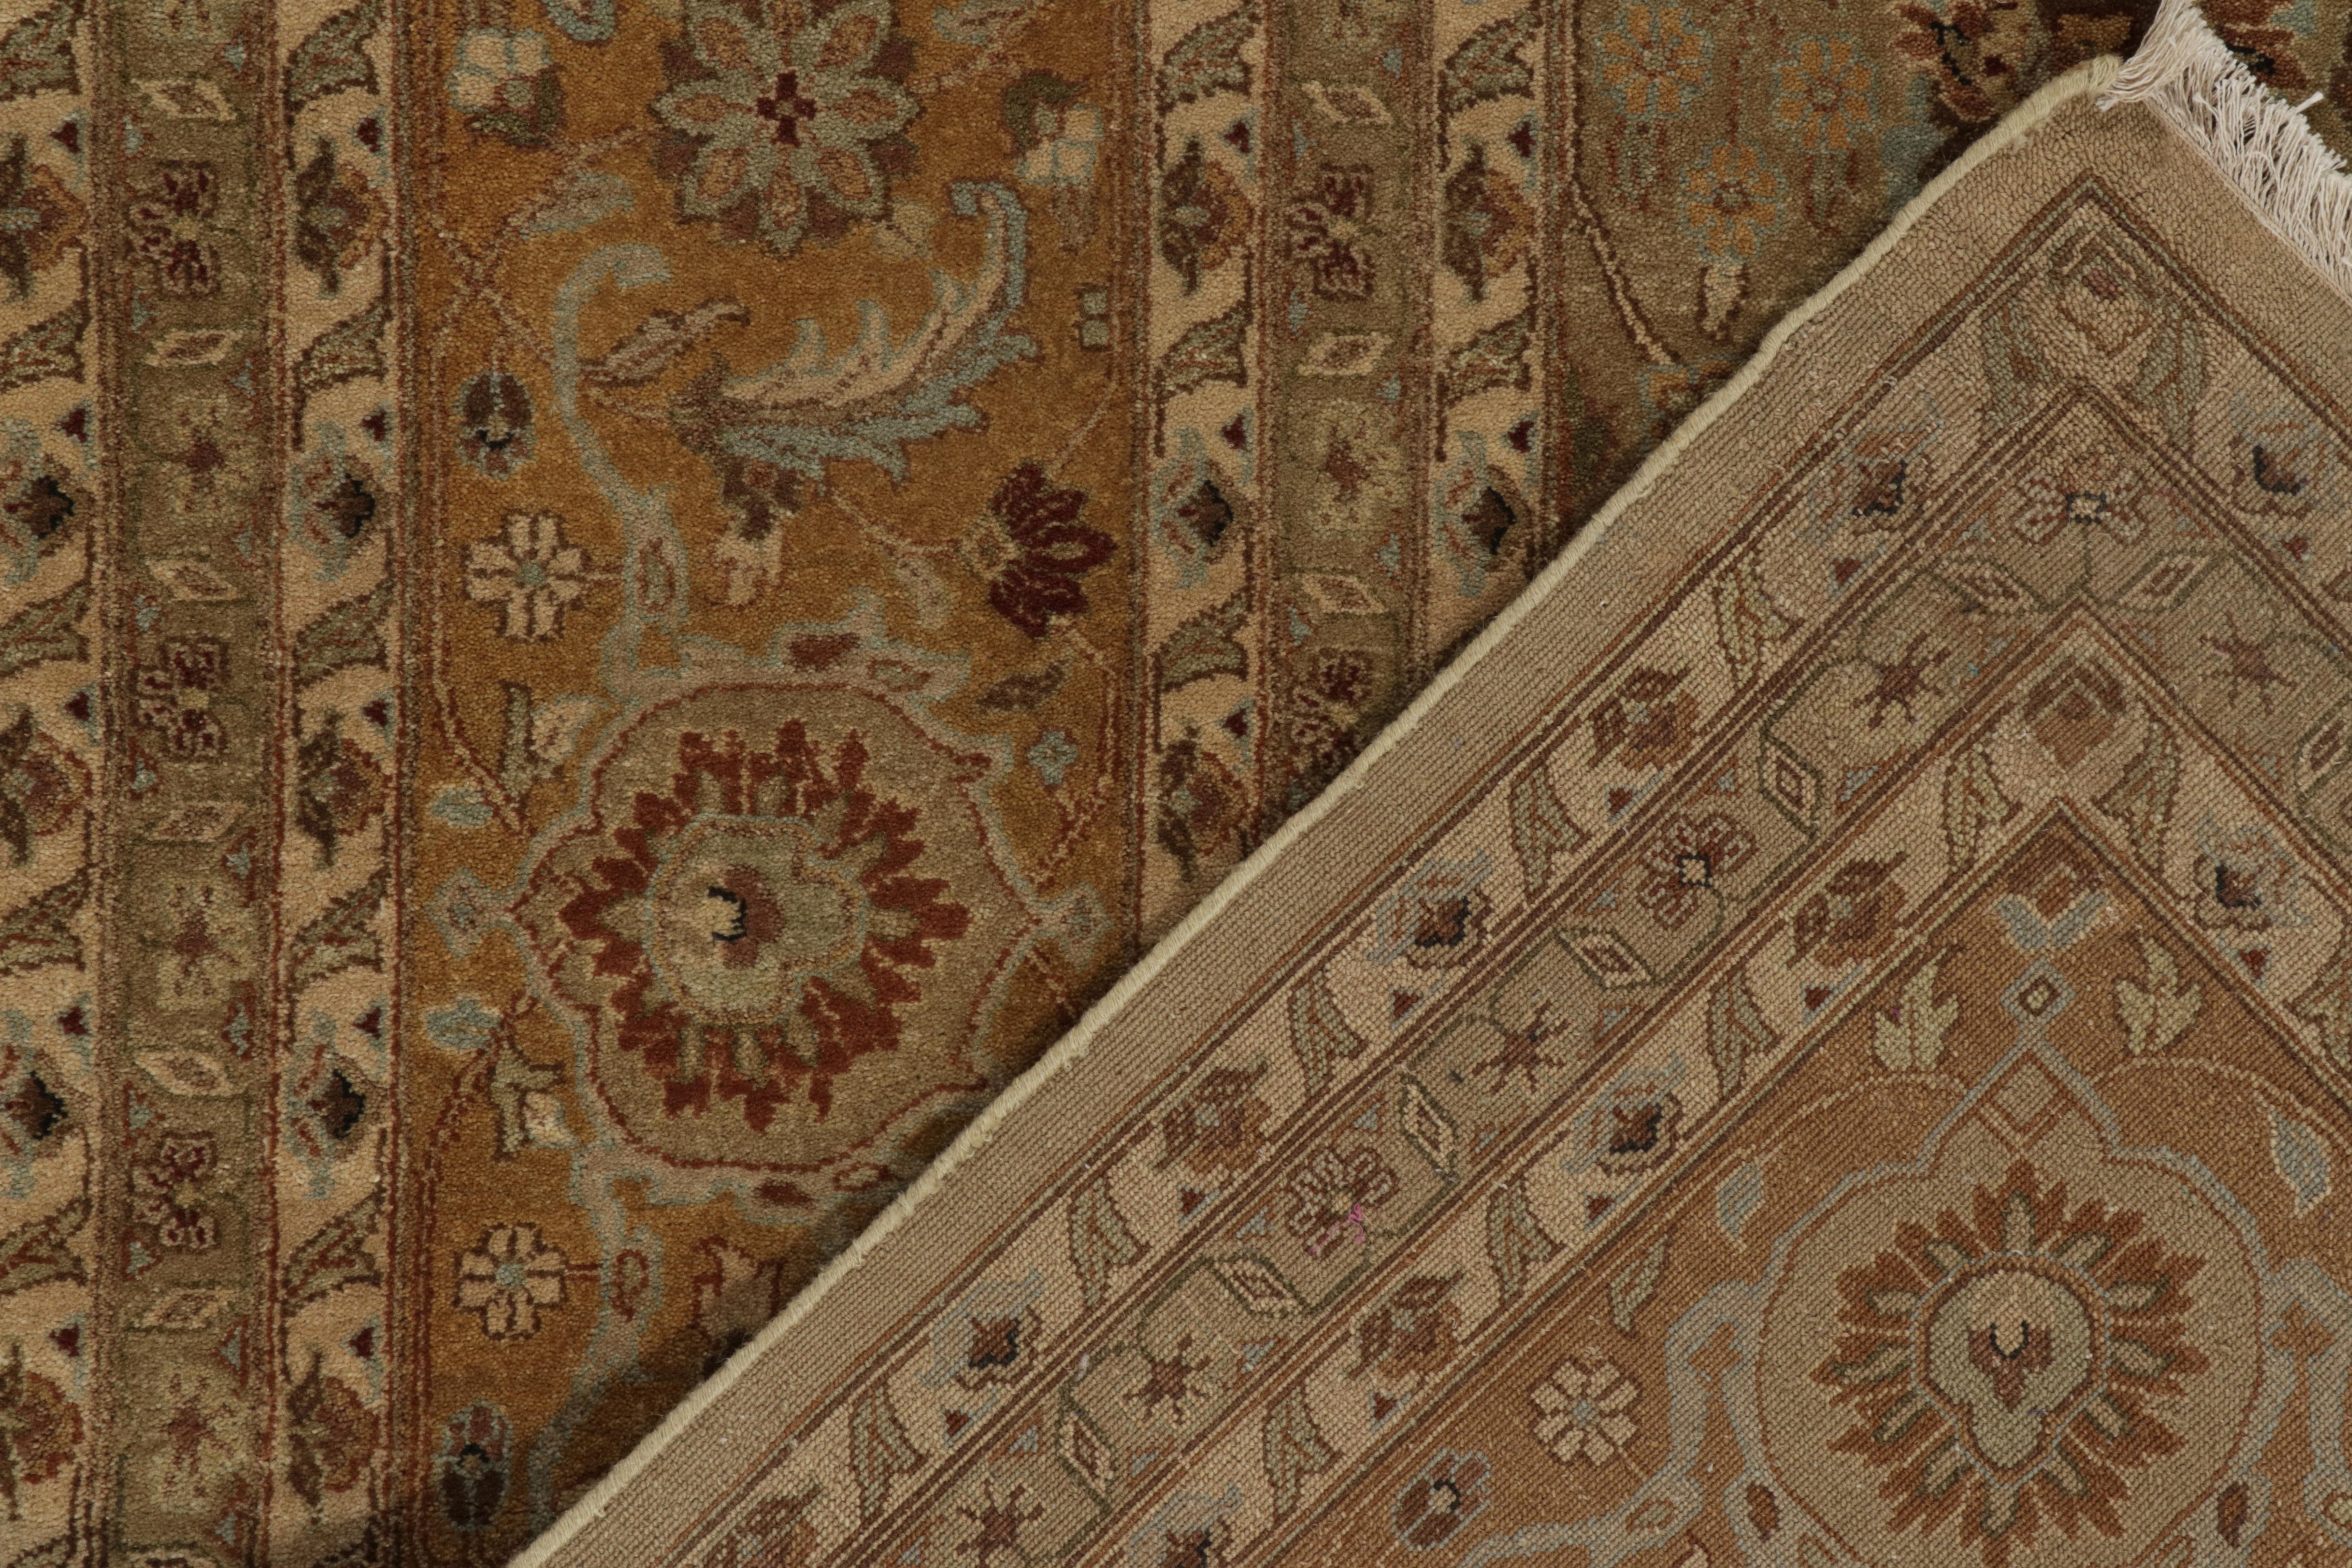 Wool Rug & Kilim’s Antique Persian style Square rug in Beige-Brown Floral Patterns For Sale